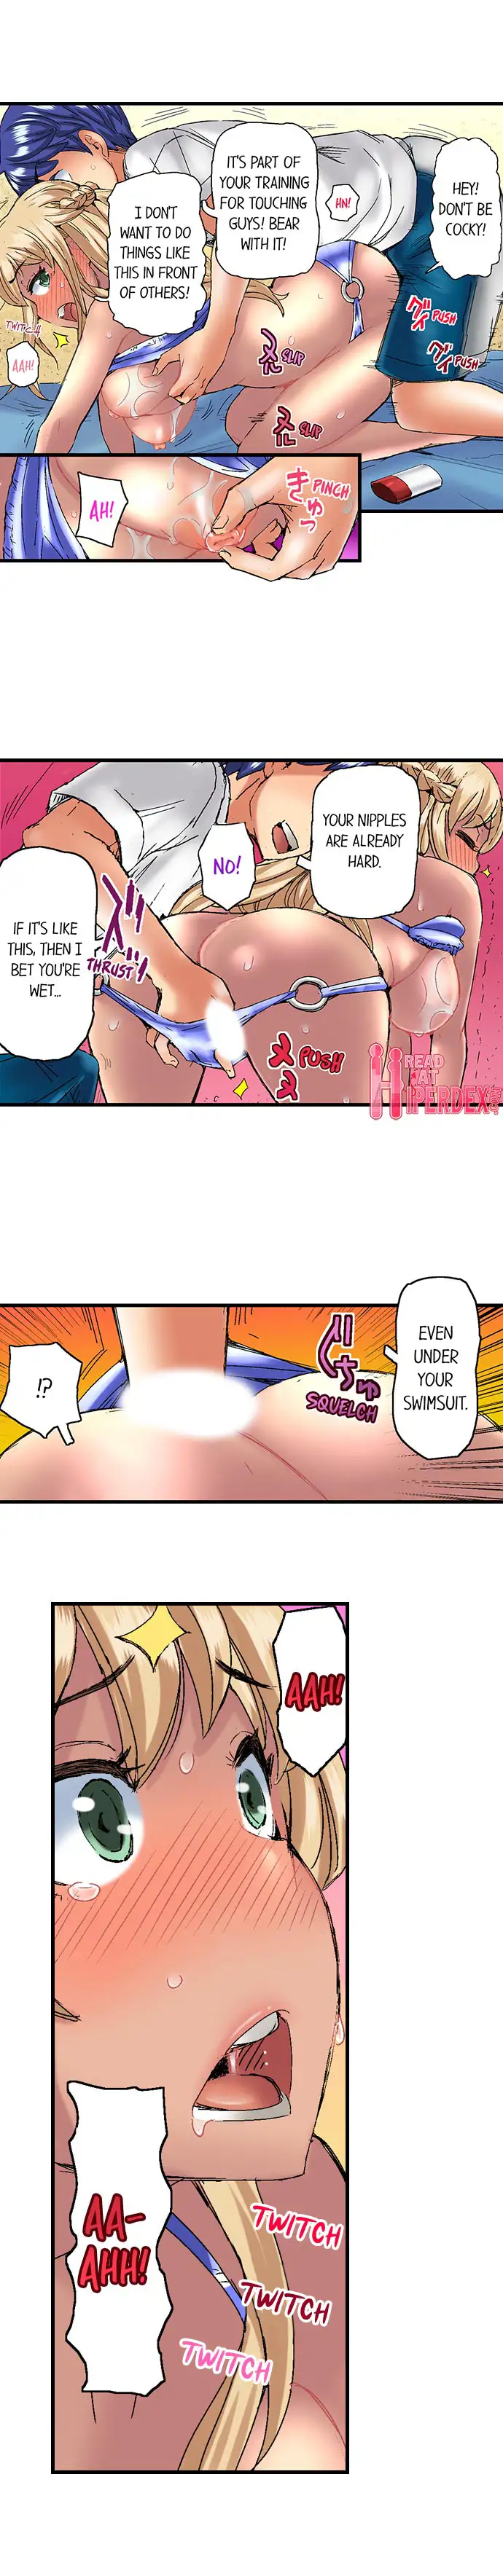 Taking a Hot Tanned Chick’s Virginity - Chapter 8 Page 5